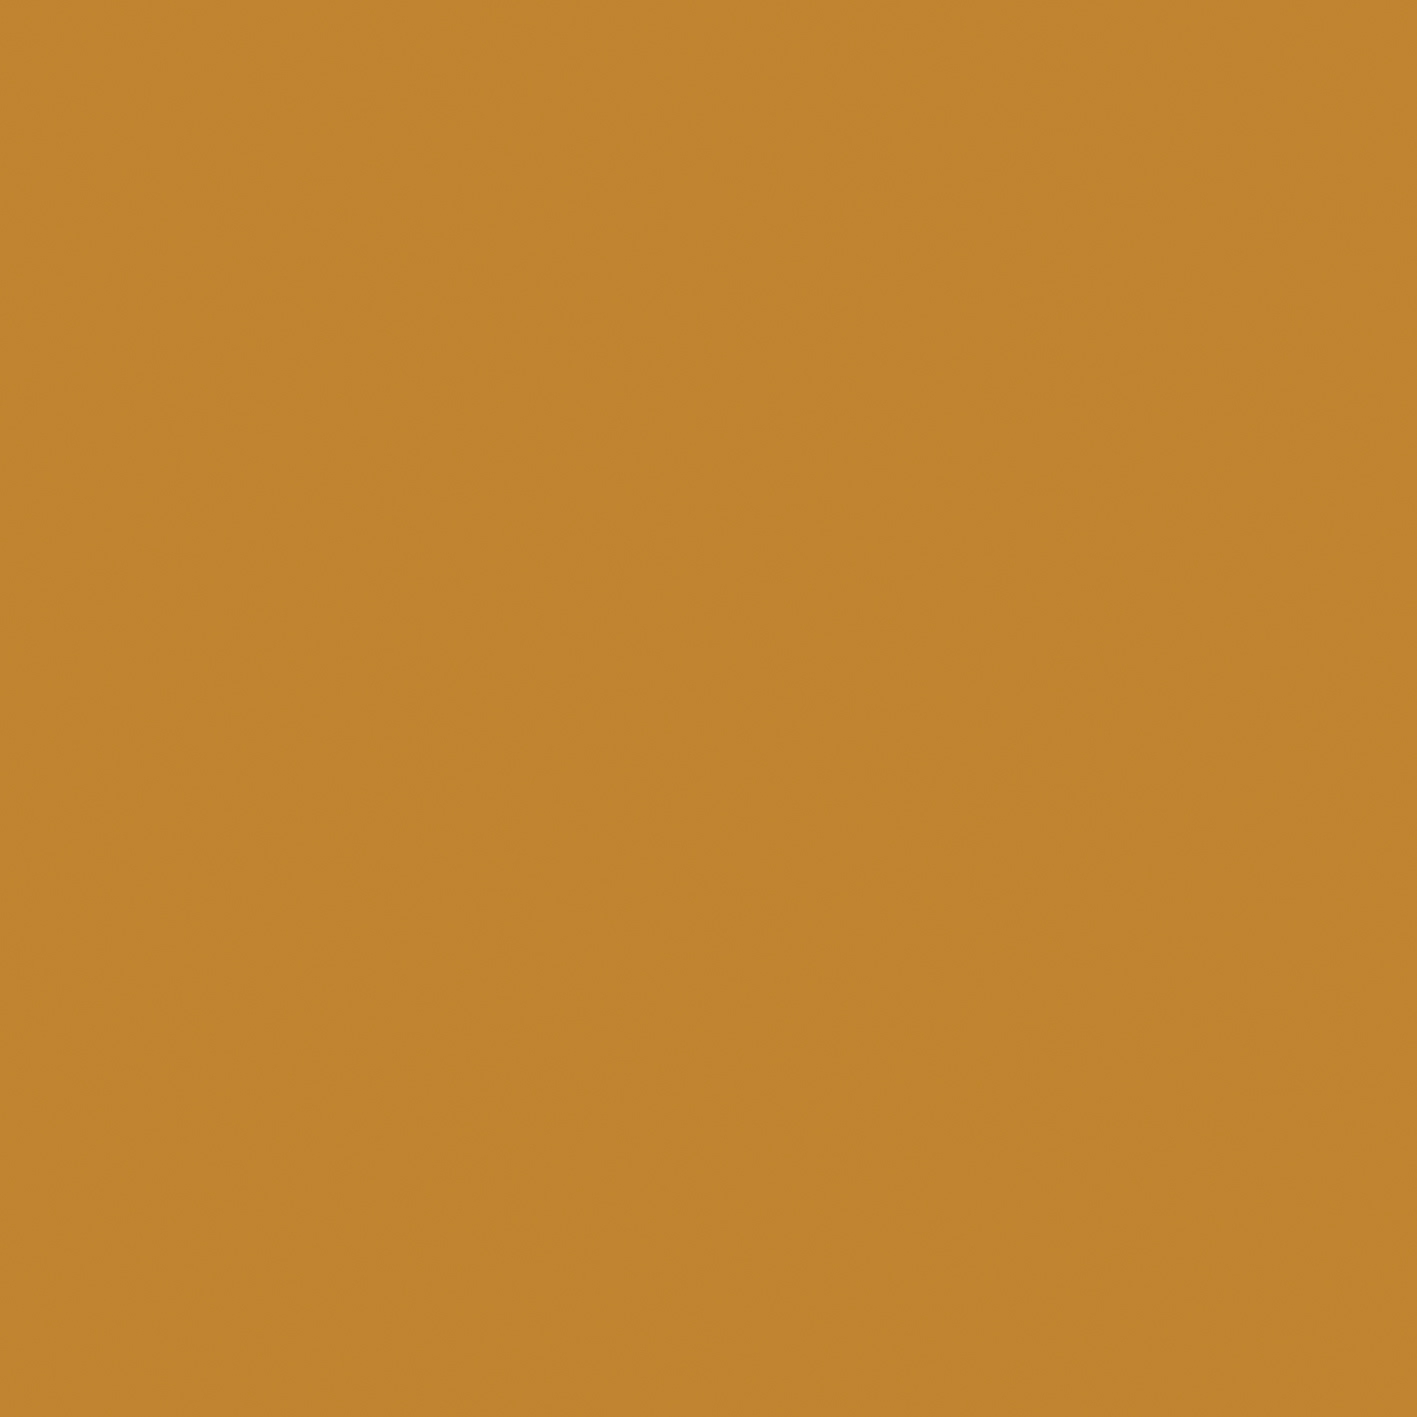 Buildtech 2.0 Bold Colors Mustard Glossy 6mm 120 x 120